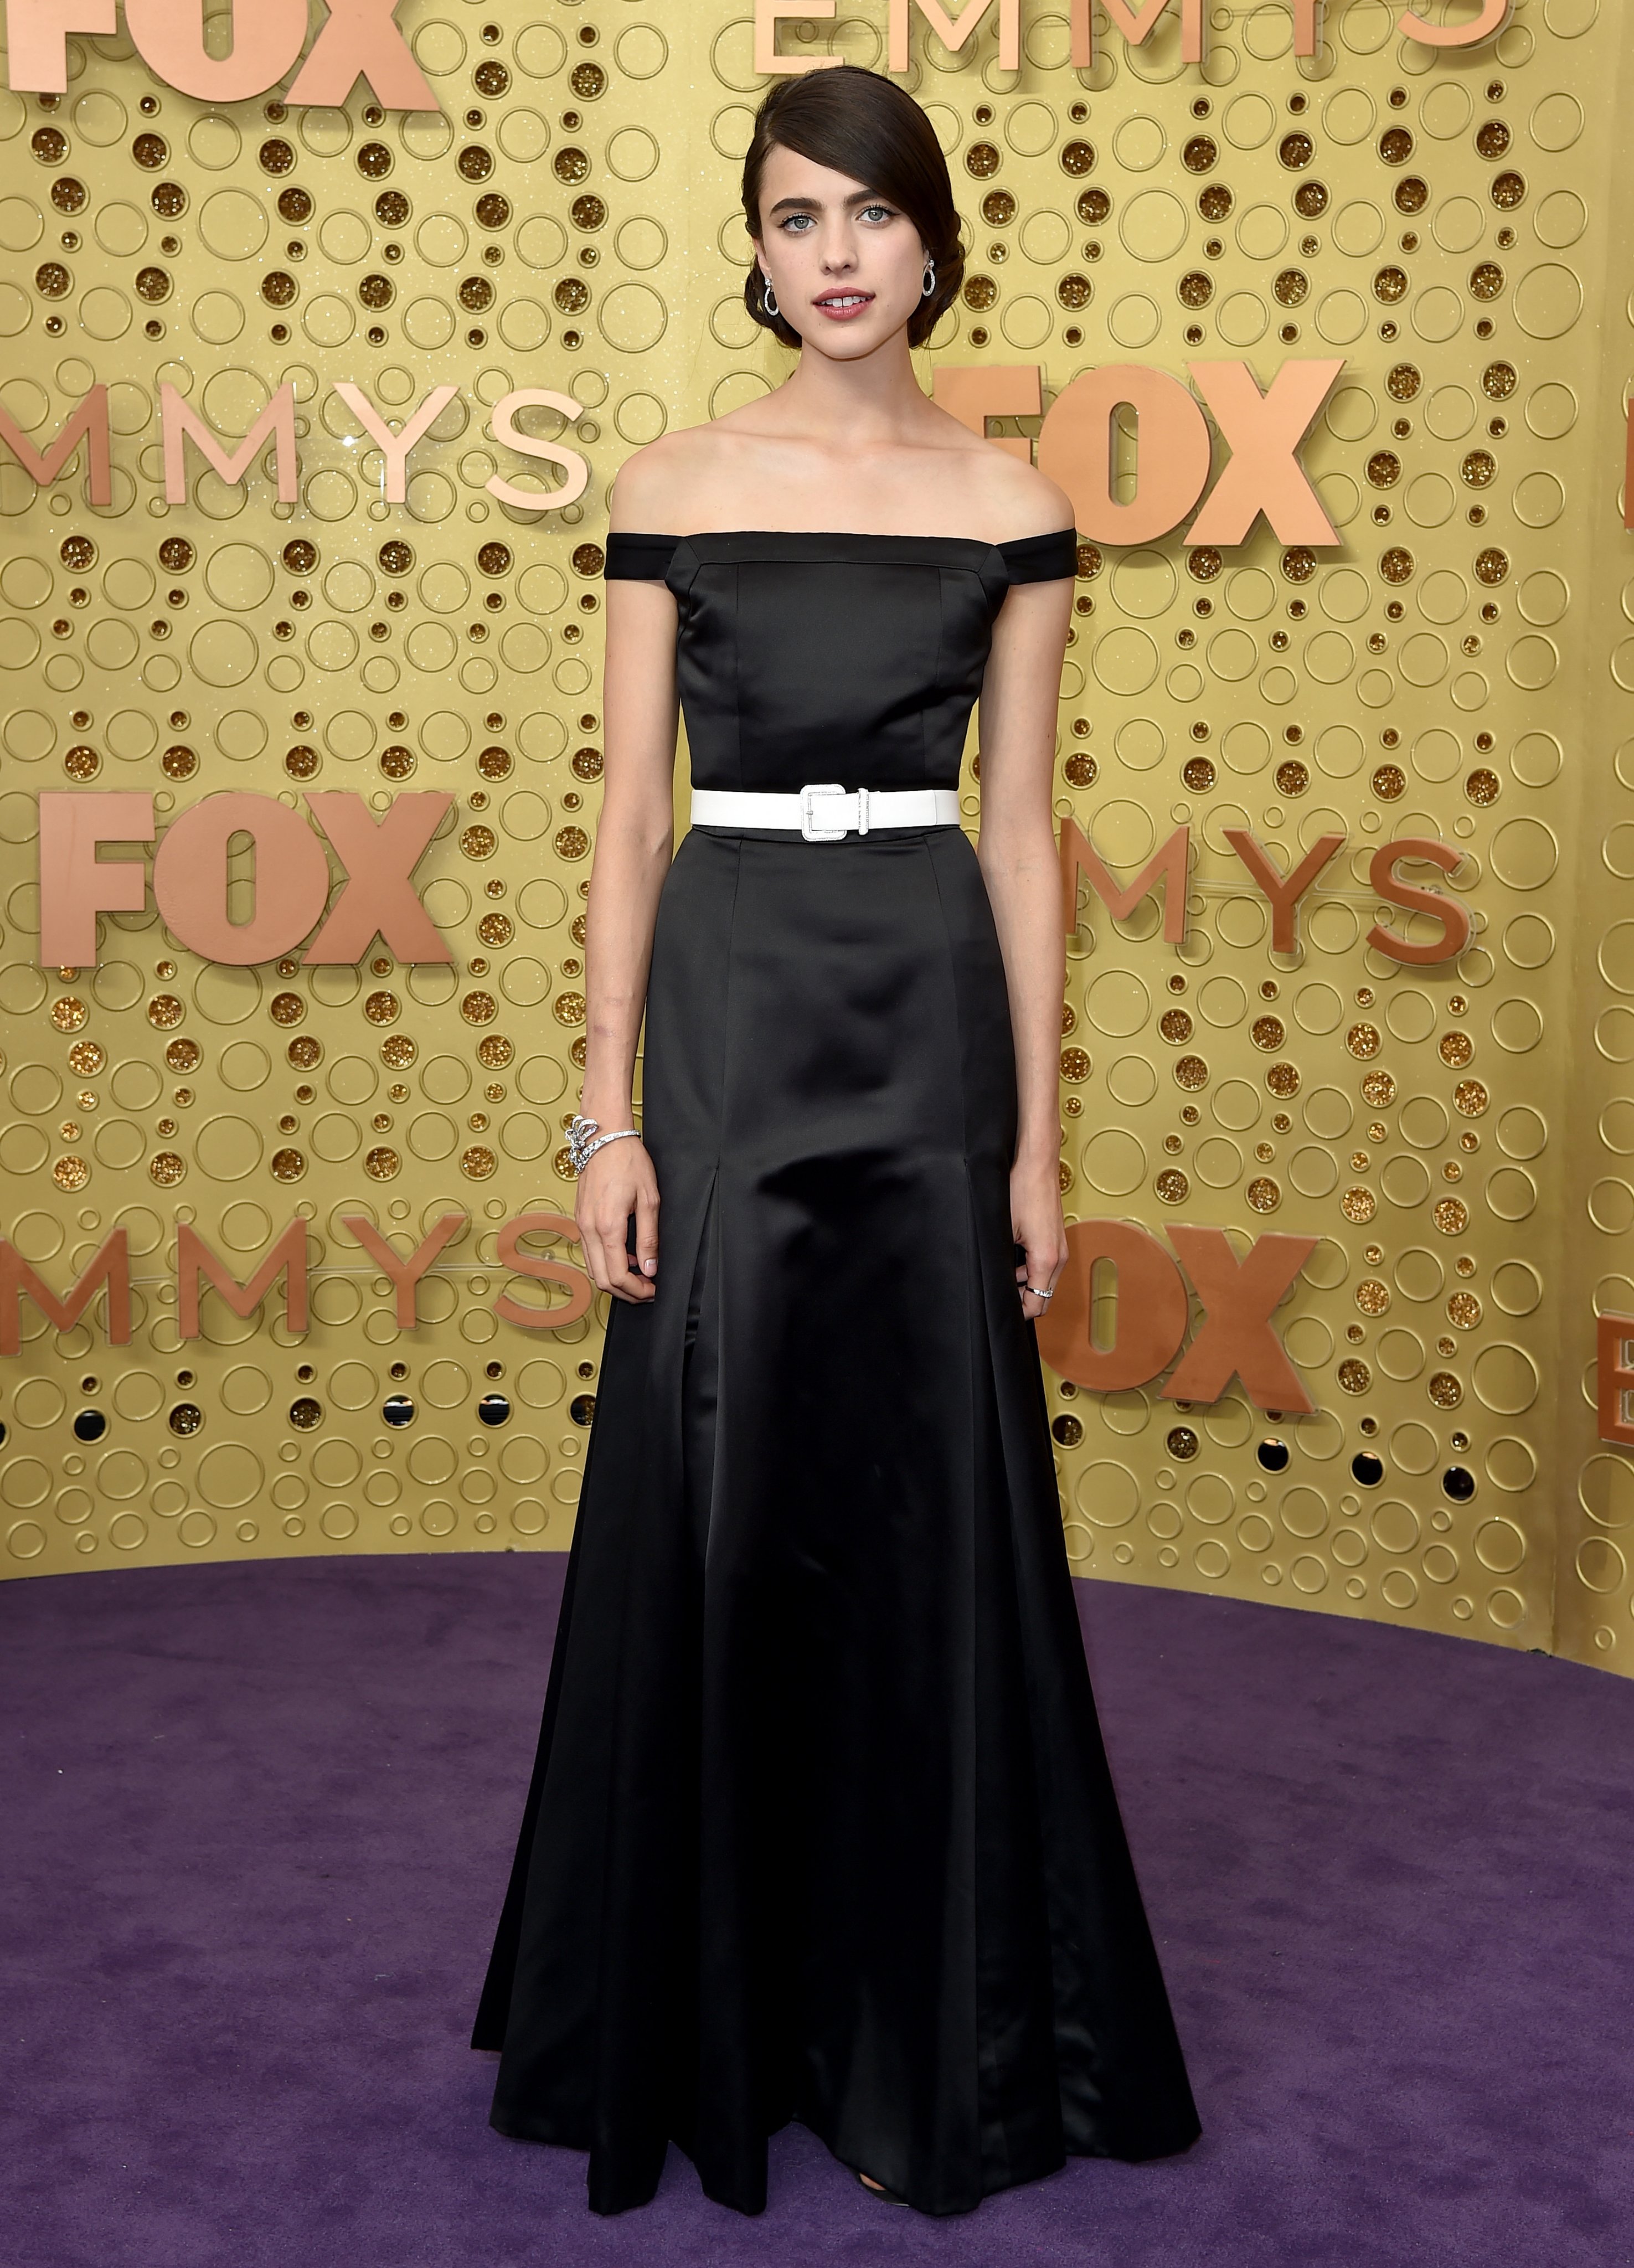 CHANEL - Actress Margaret Qualley wore a black muslin dress with a